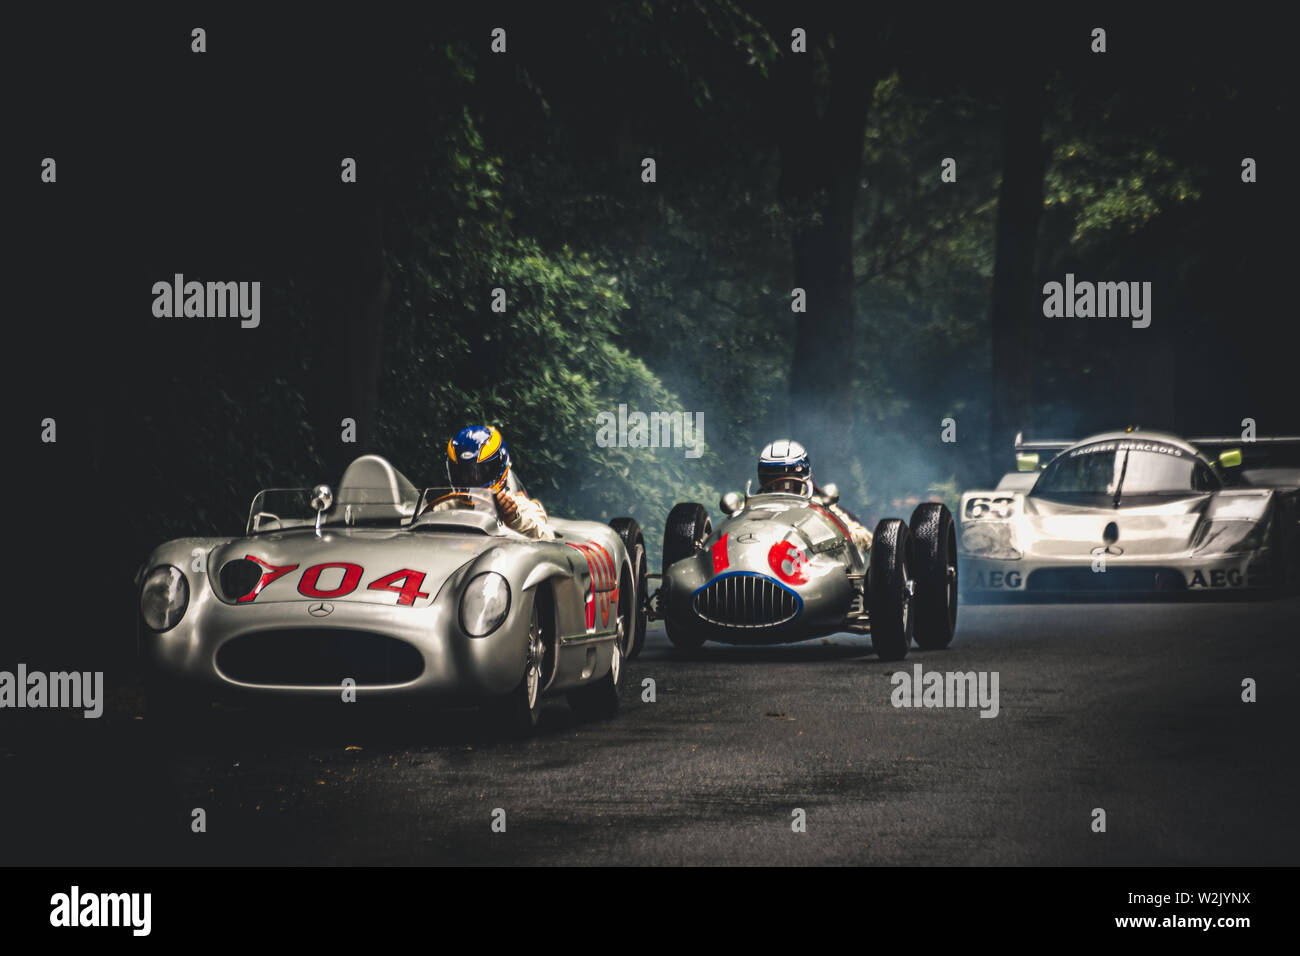 A line up of three classic and vintage Mercedes Benz racing and sports cars at Goodwood Festival of Speed 2019 in the dark shadow of the trees Stock Photo